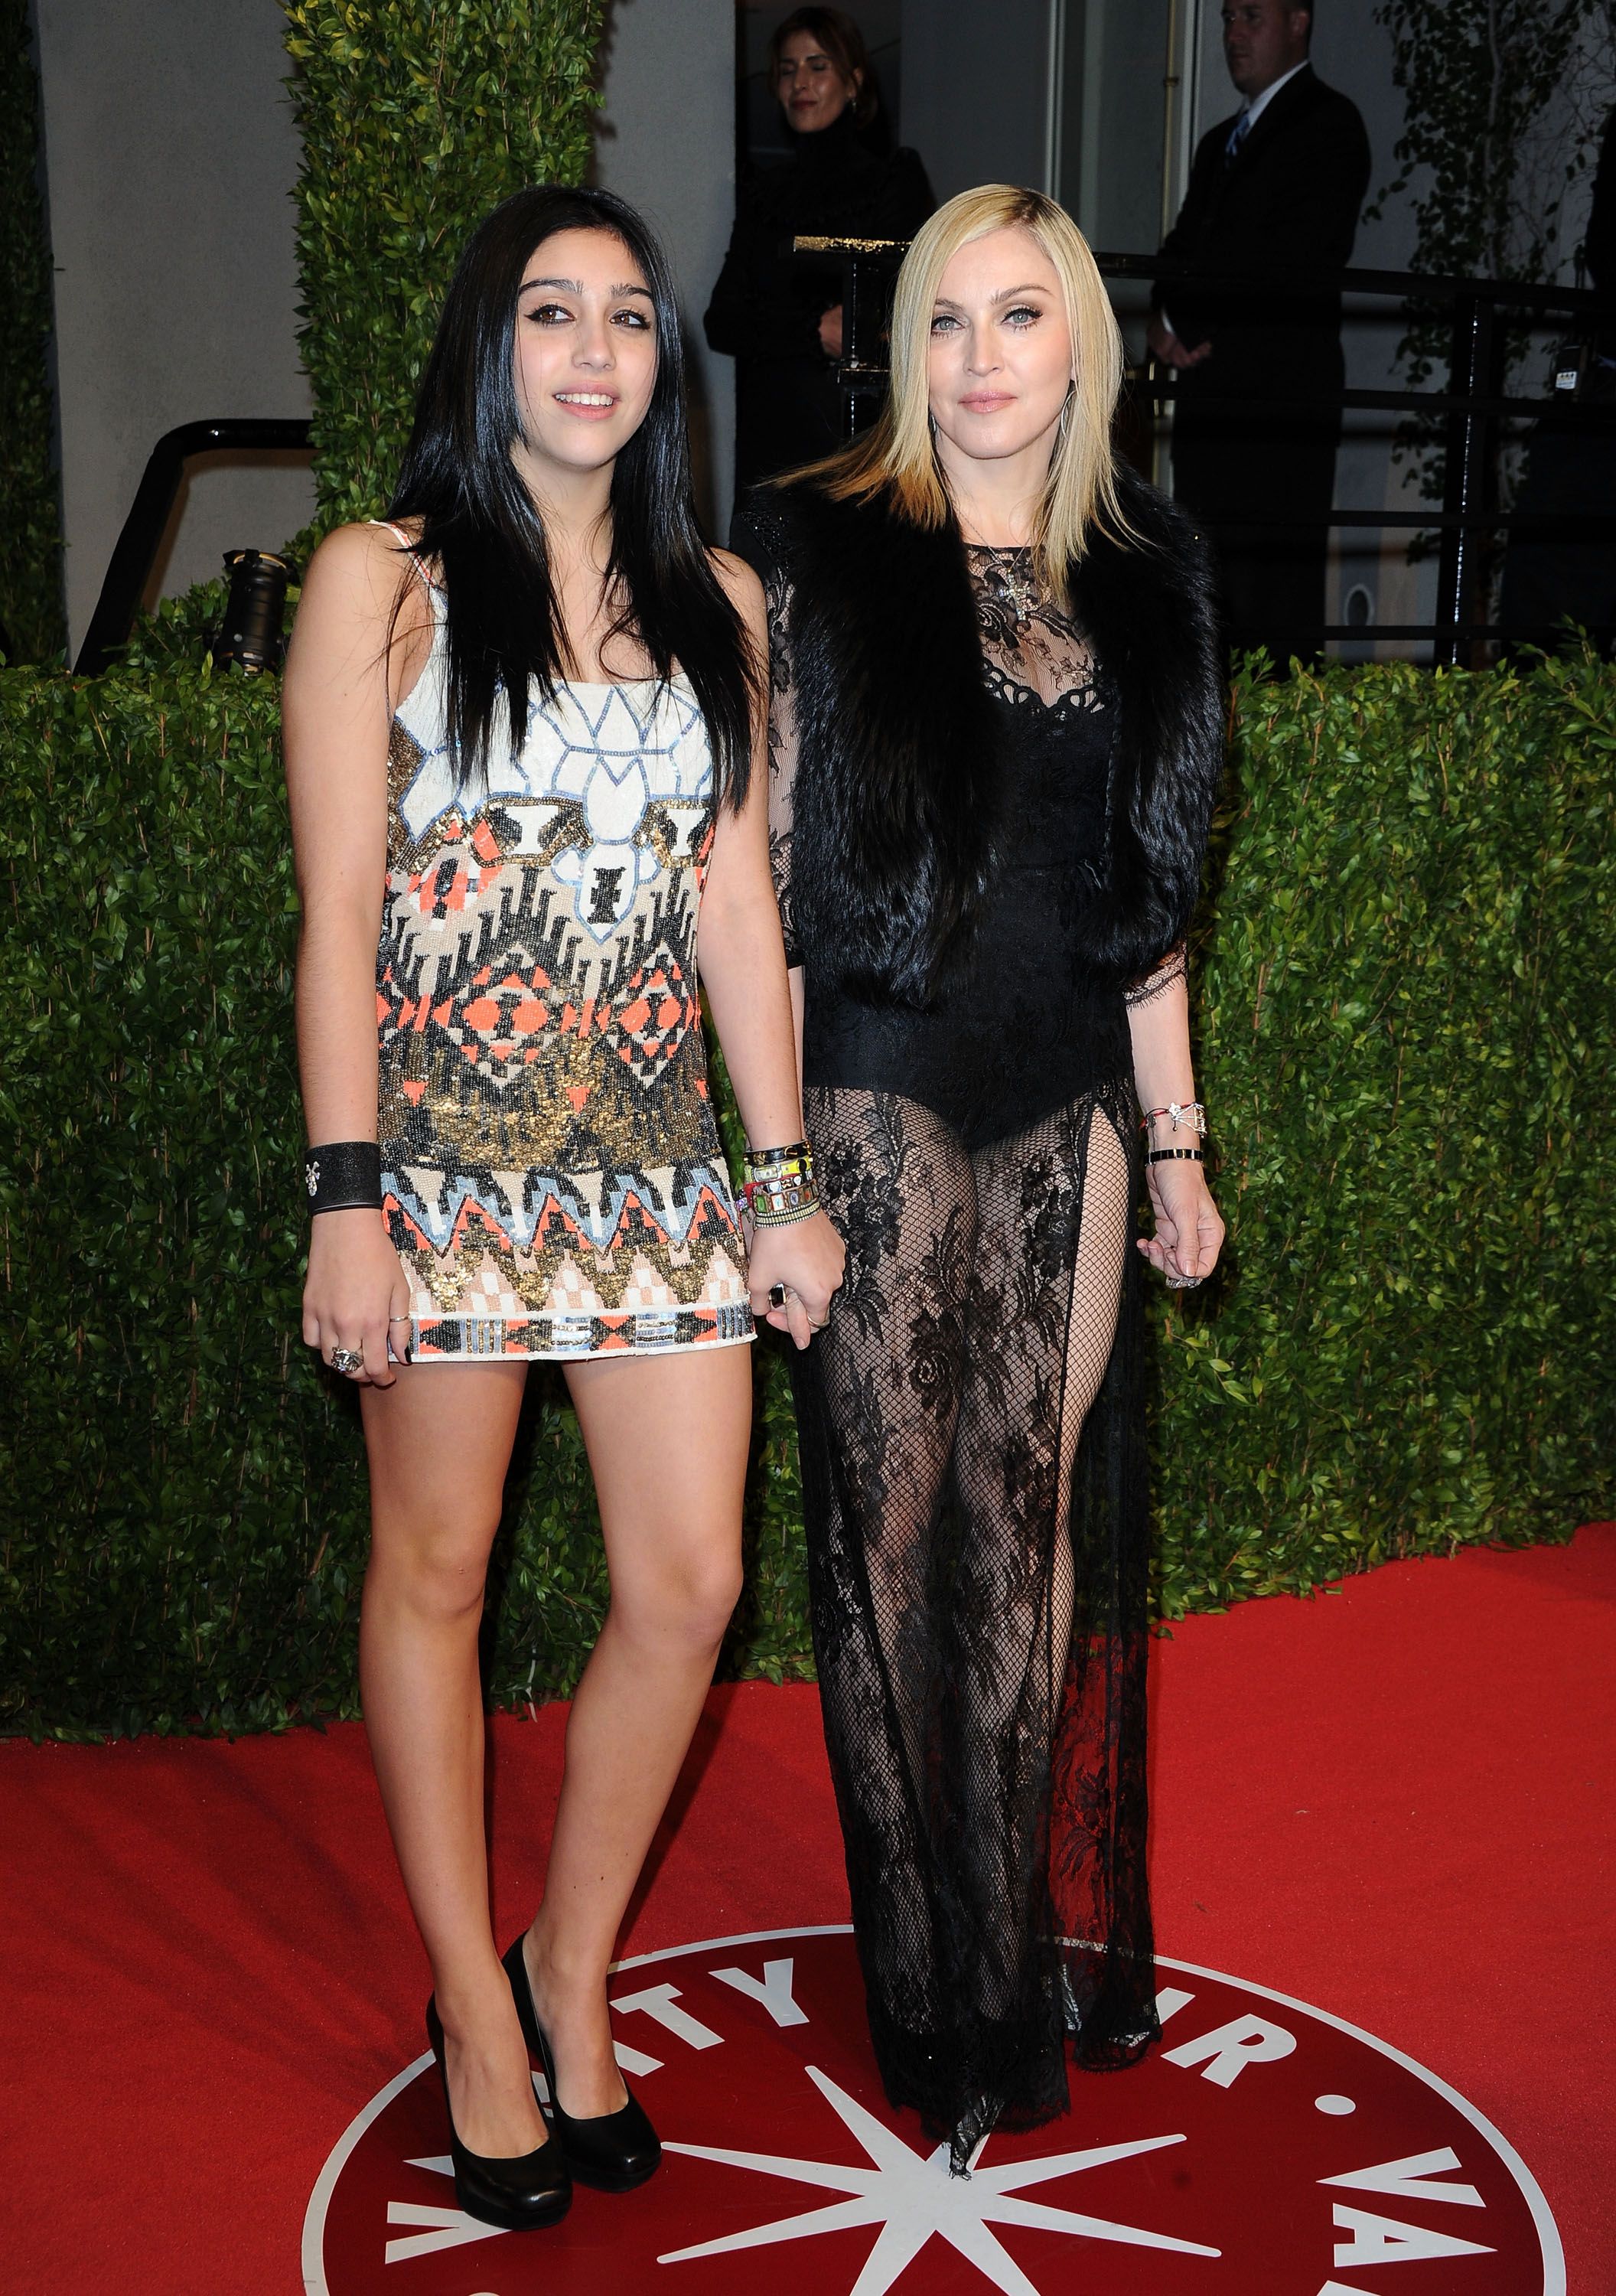 Lourdes Leon and Madonna at the Vanity Fair Oscar party hosted by Graydon Carter held at Sunset Tower on February 27, 2011 | Photo: Getty Images